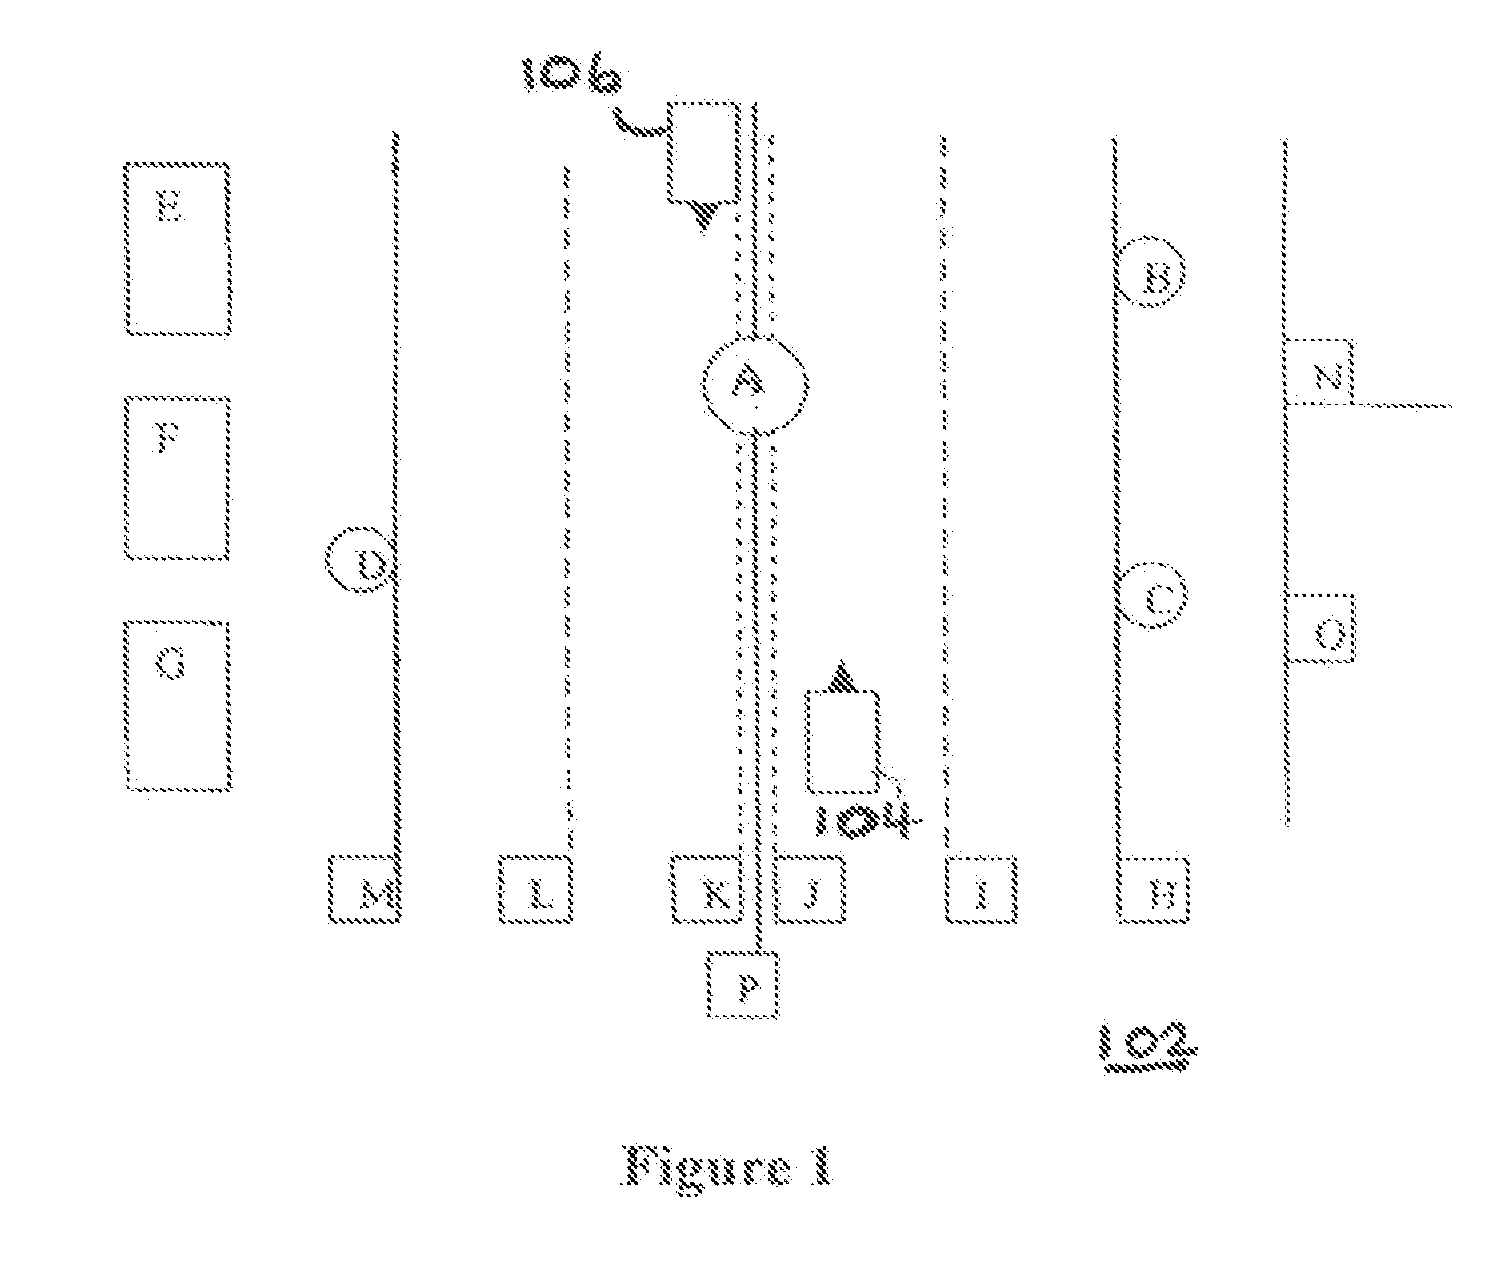 System and method for vehicle navigation and piloting including absolute and relative coordinates